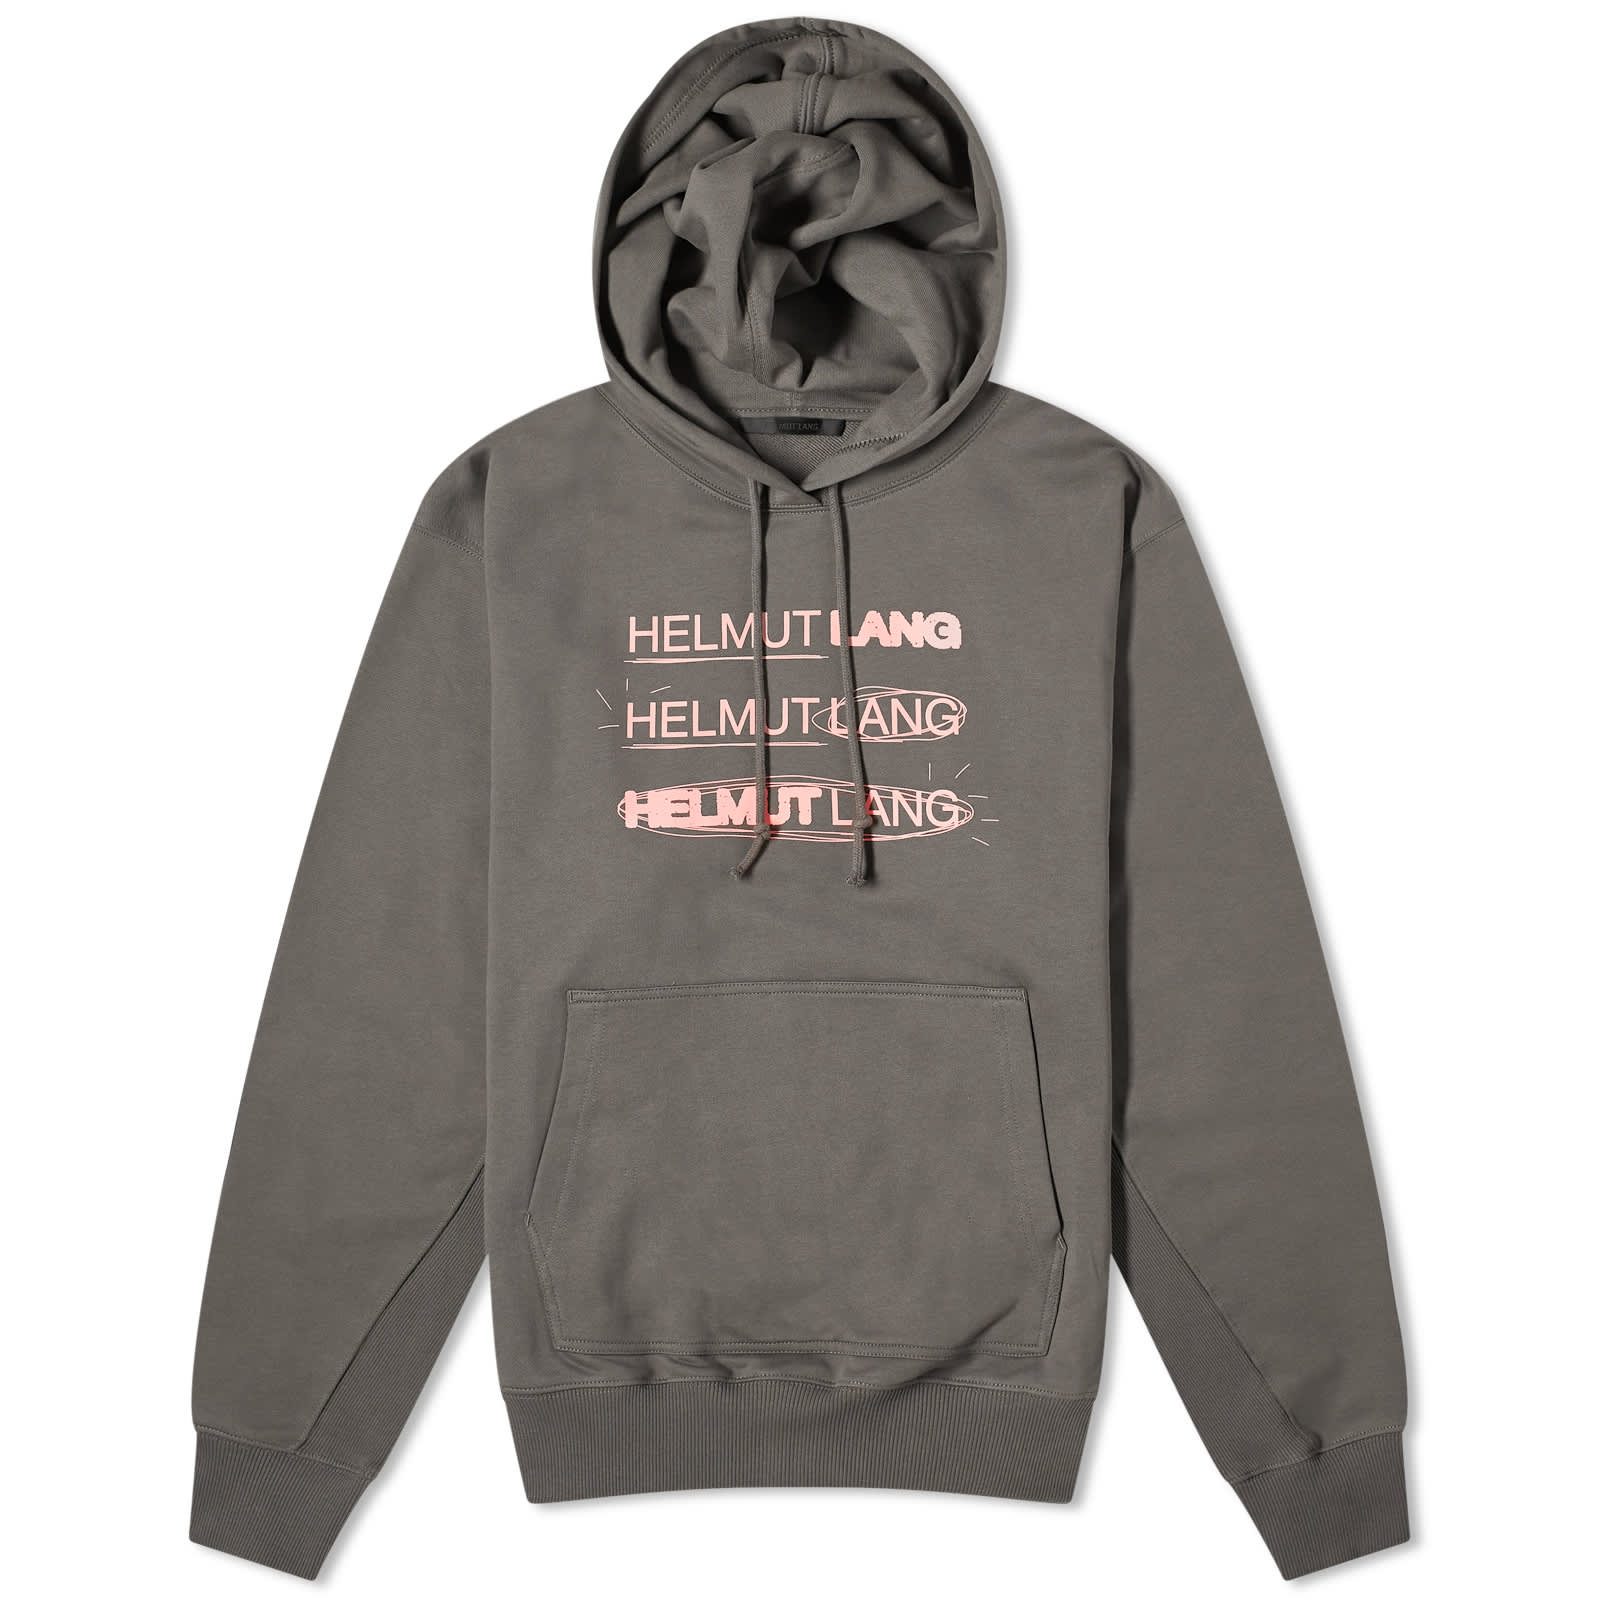 Худи Helmut Lang Outer Space, цвет Ash худи helmut lang outer space оливковое